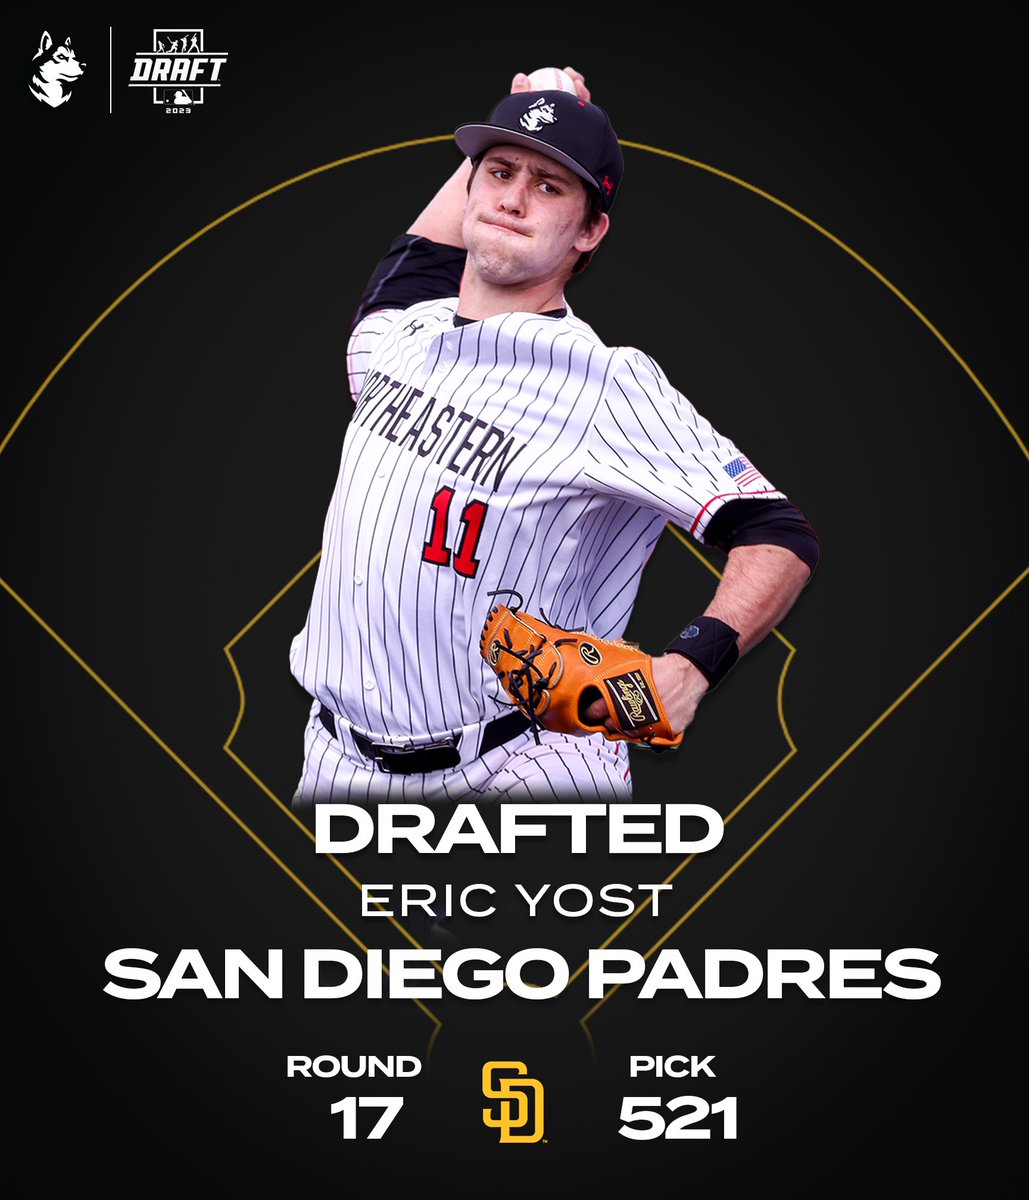 Atta boy, Yosty!

Eric Yost has been drafted by the San Diego Padres in the 17th Round!

#HowlinHuskies